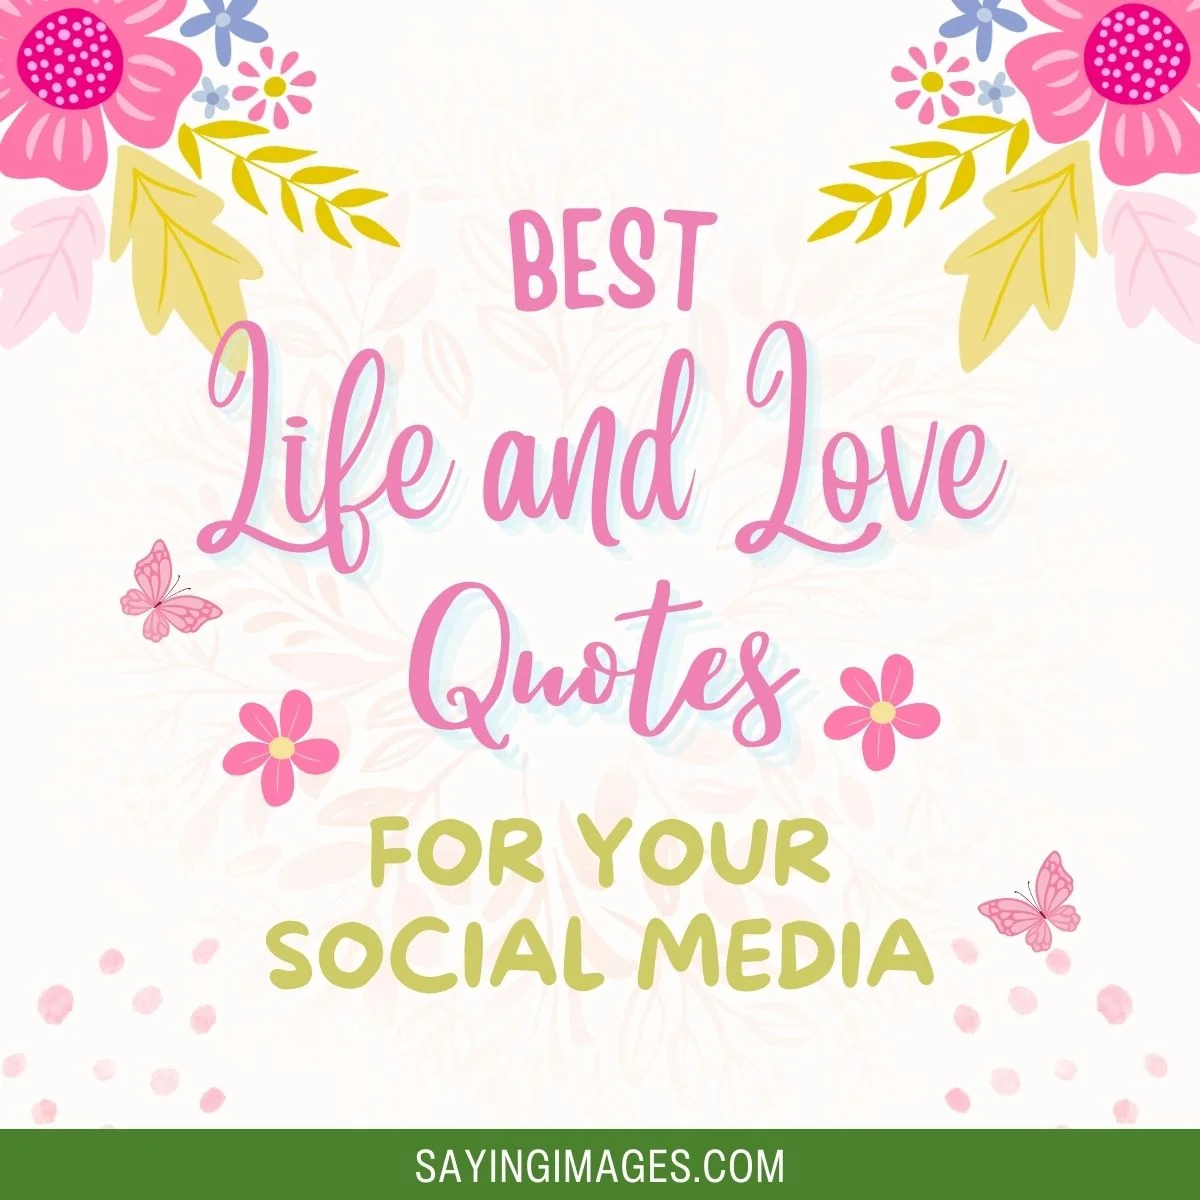 Life and Love Quotes for Your Social Media